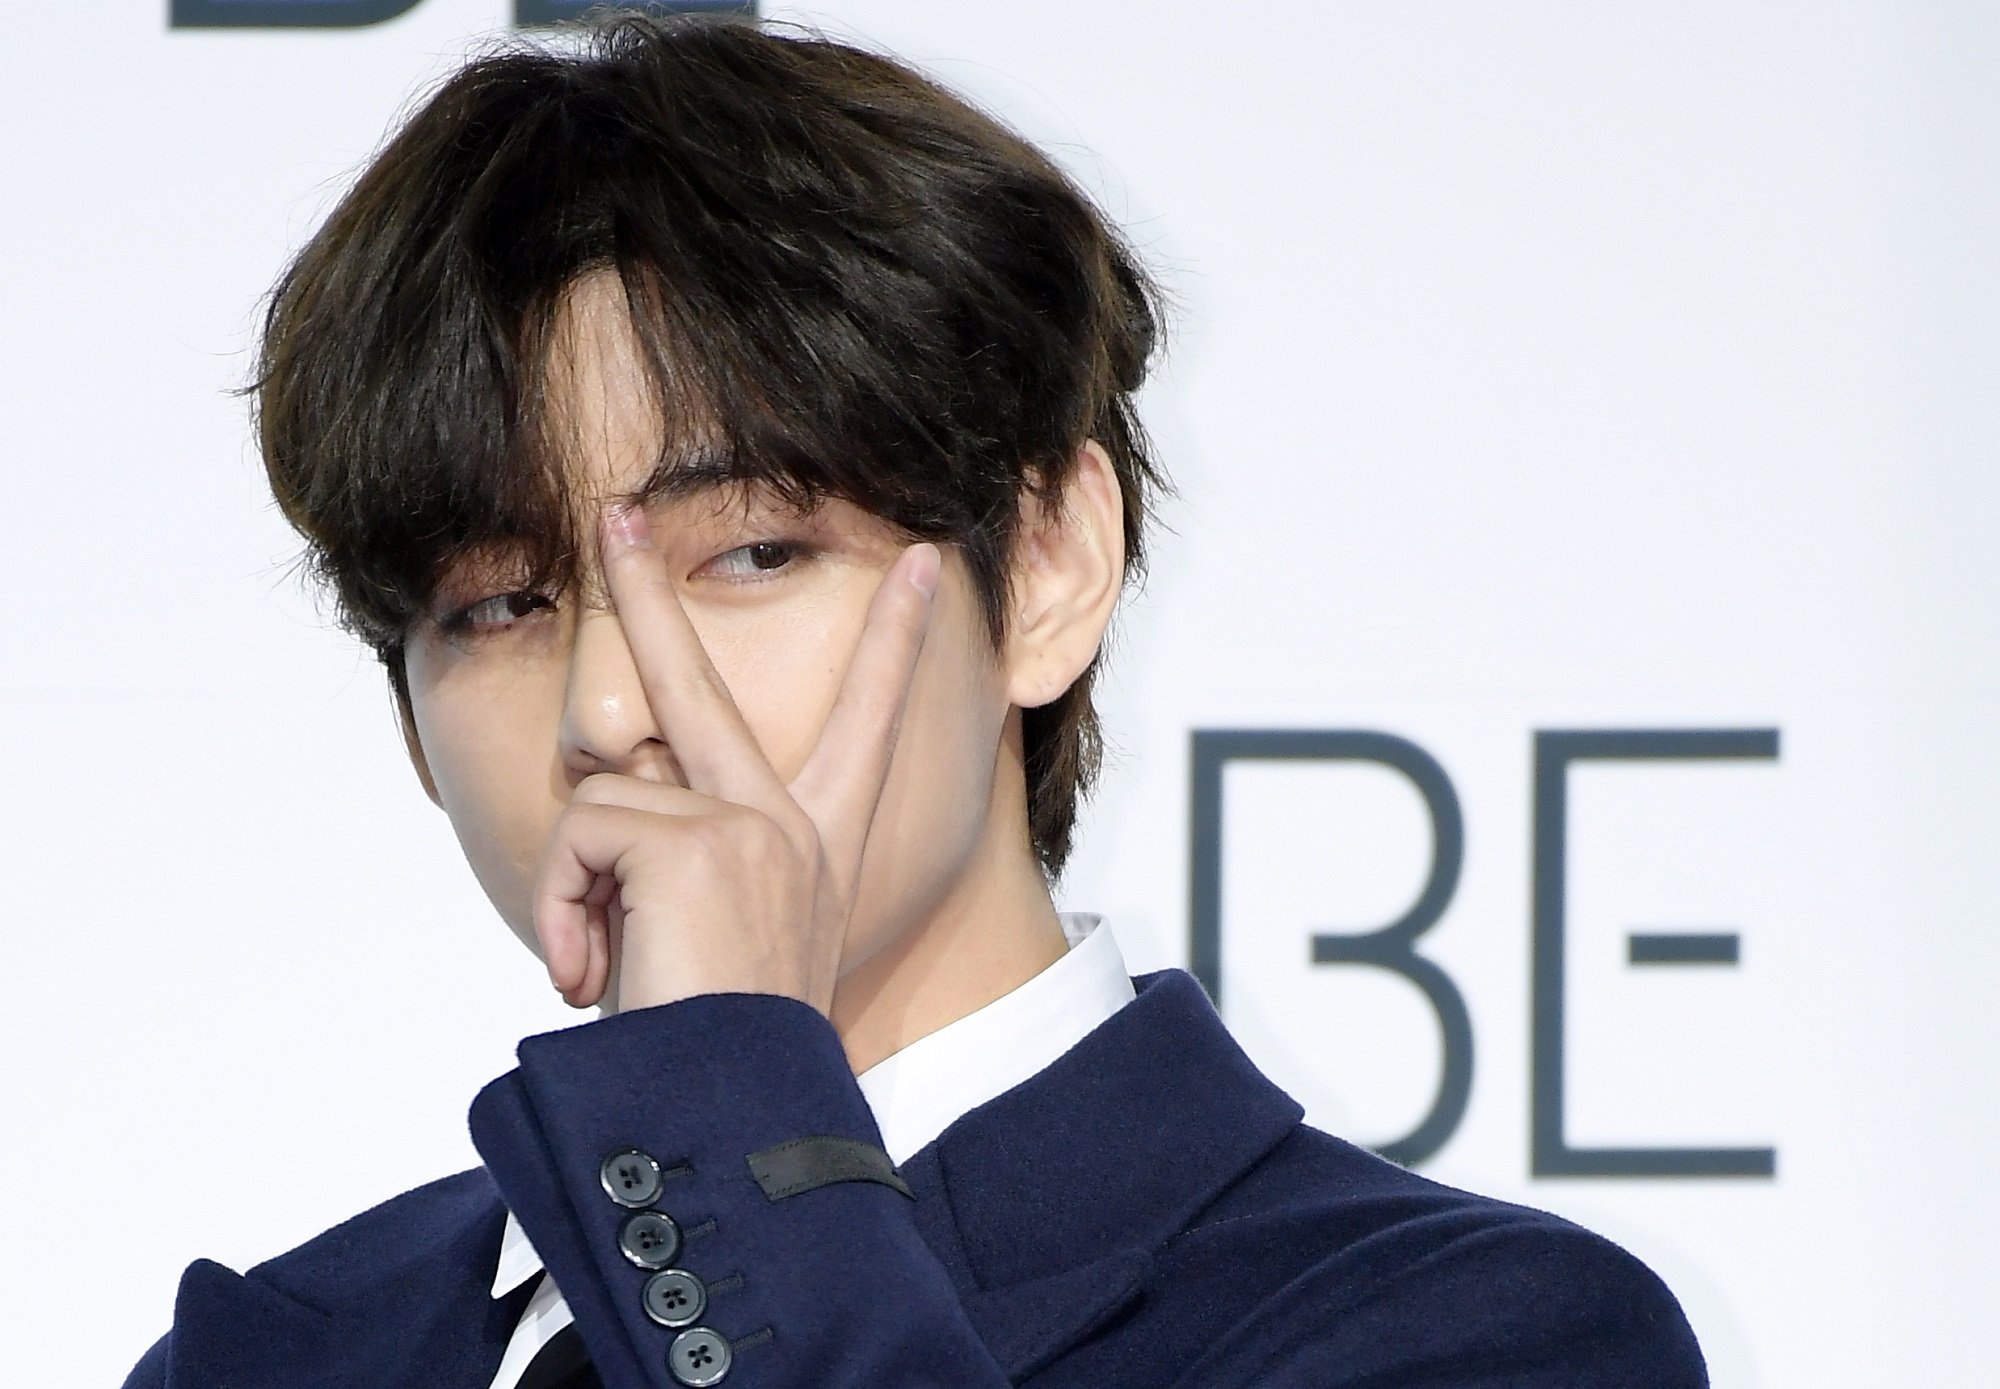 V of BTS covers his face with the peace sign at BTS' 'BE' album press conference